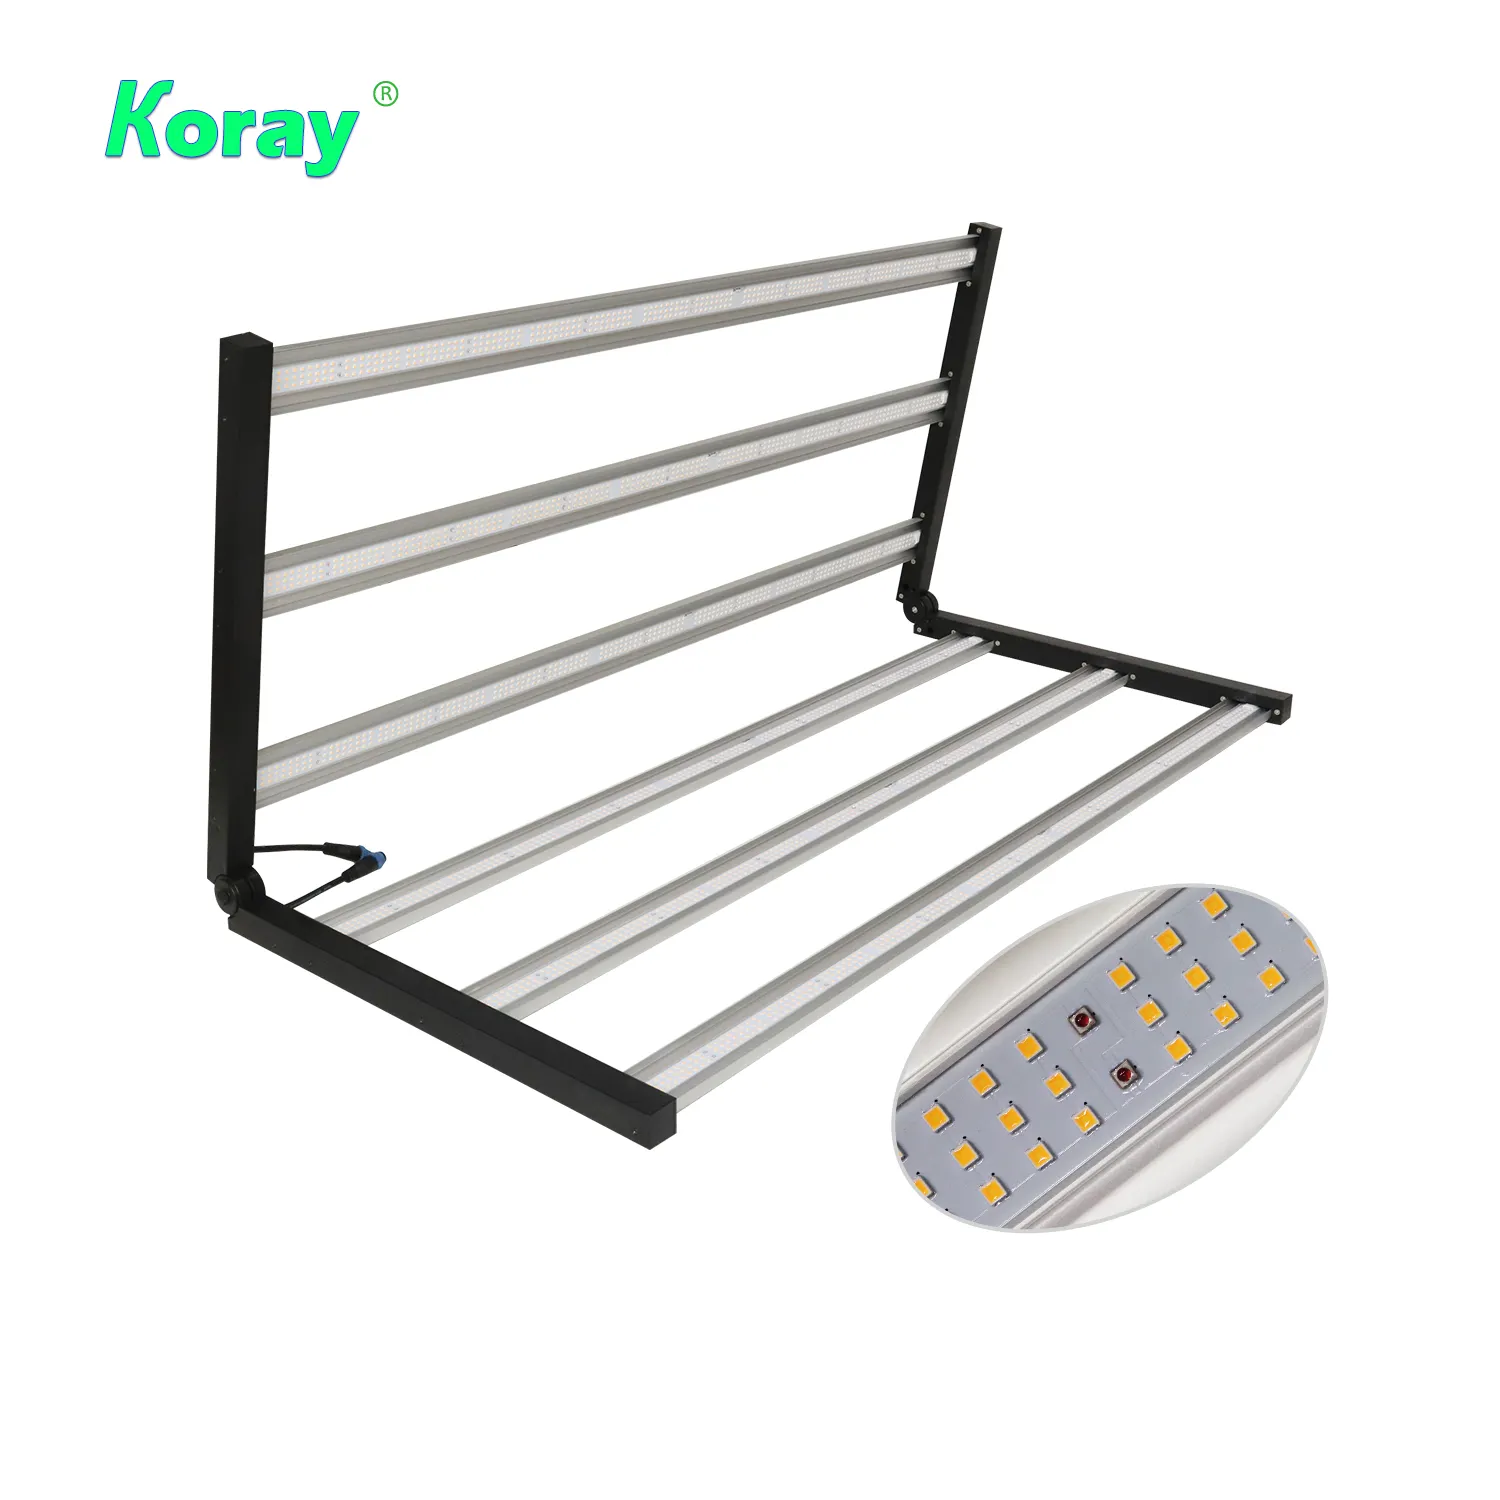 Koray RX-G120 630W LED grow light horticulture LM301B LM301H 2.8umol/J full spectrum plant lamp grow led for indoor plants grow